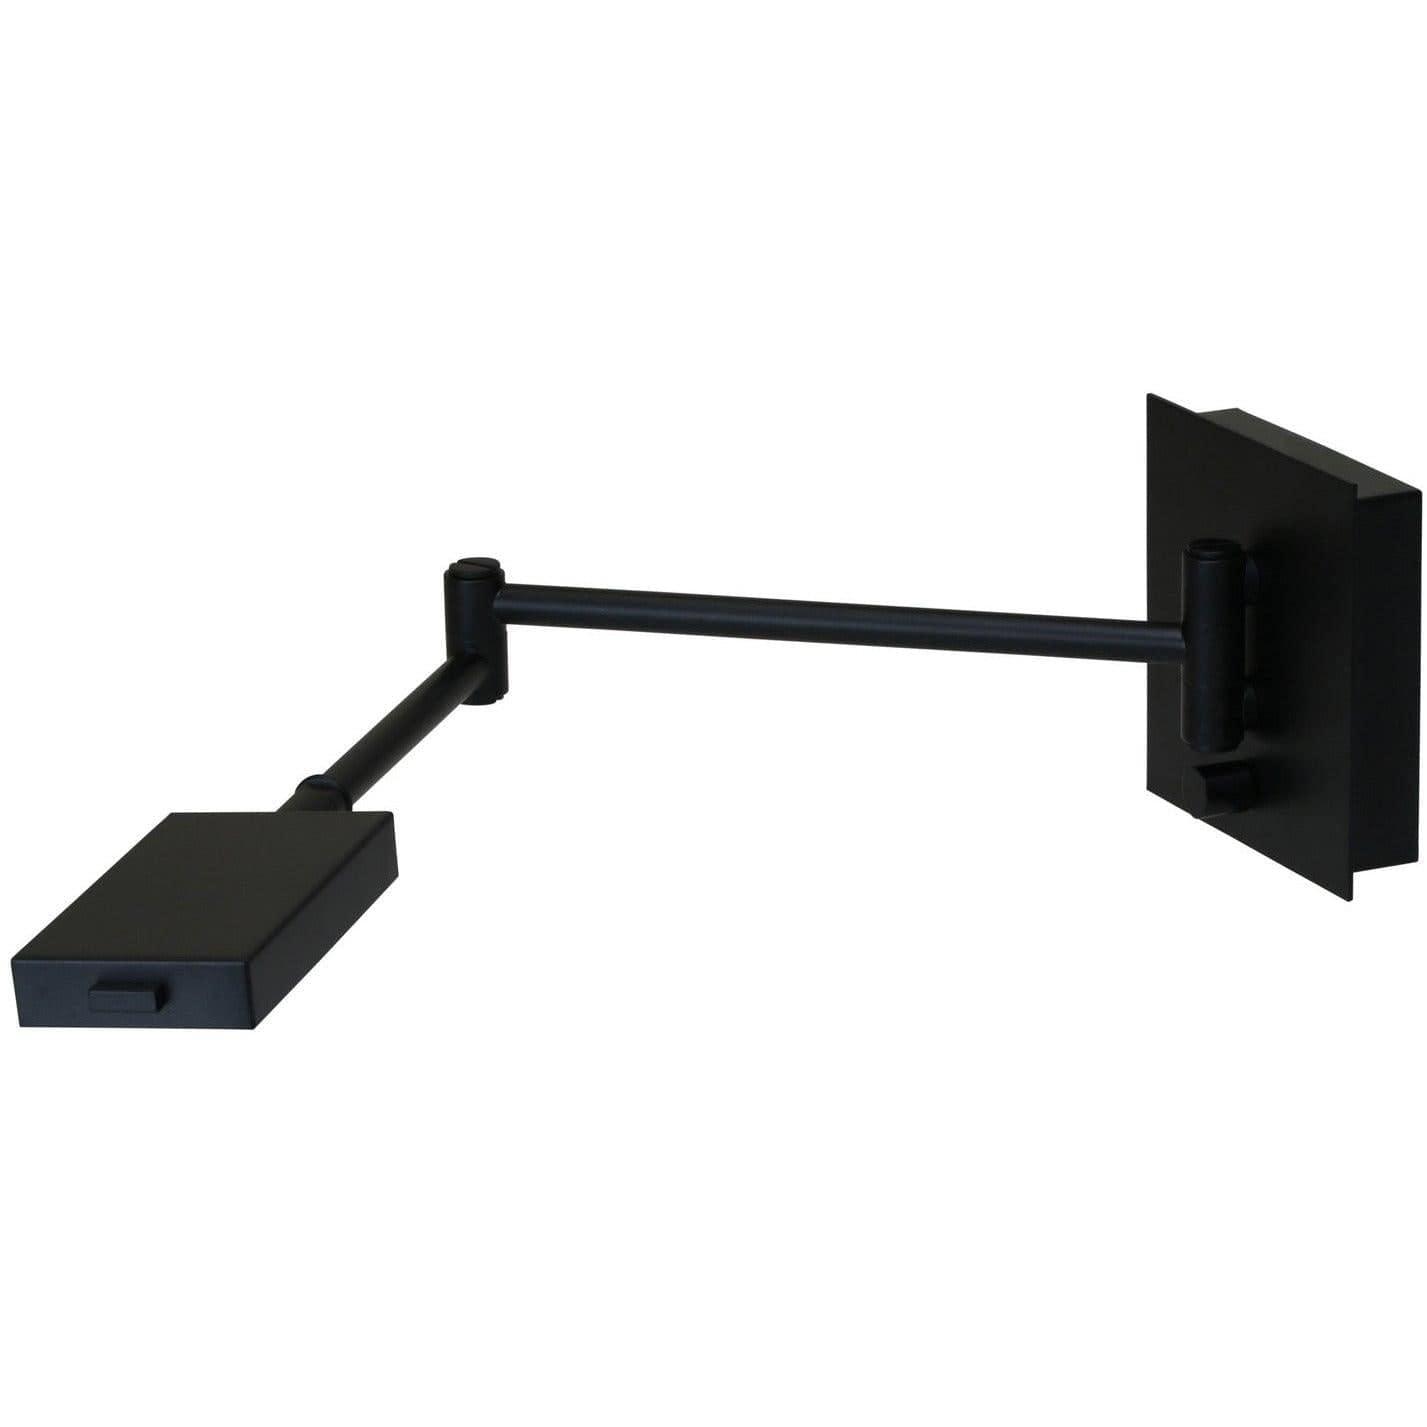 House of Troy - Generation LED Wall Sconce - G575-BLK | Montreal Lighting & Hardware